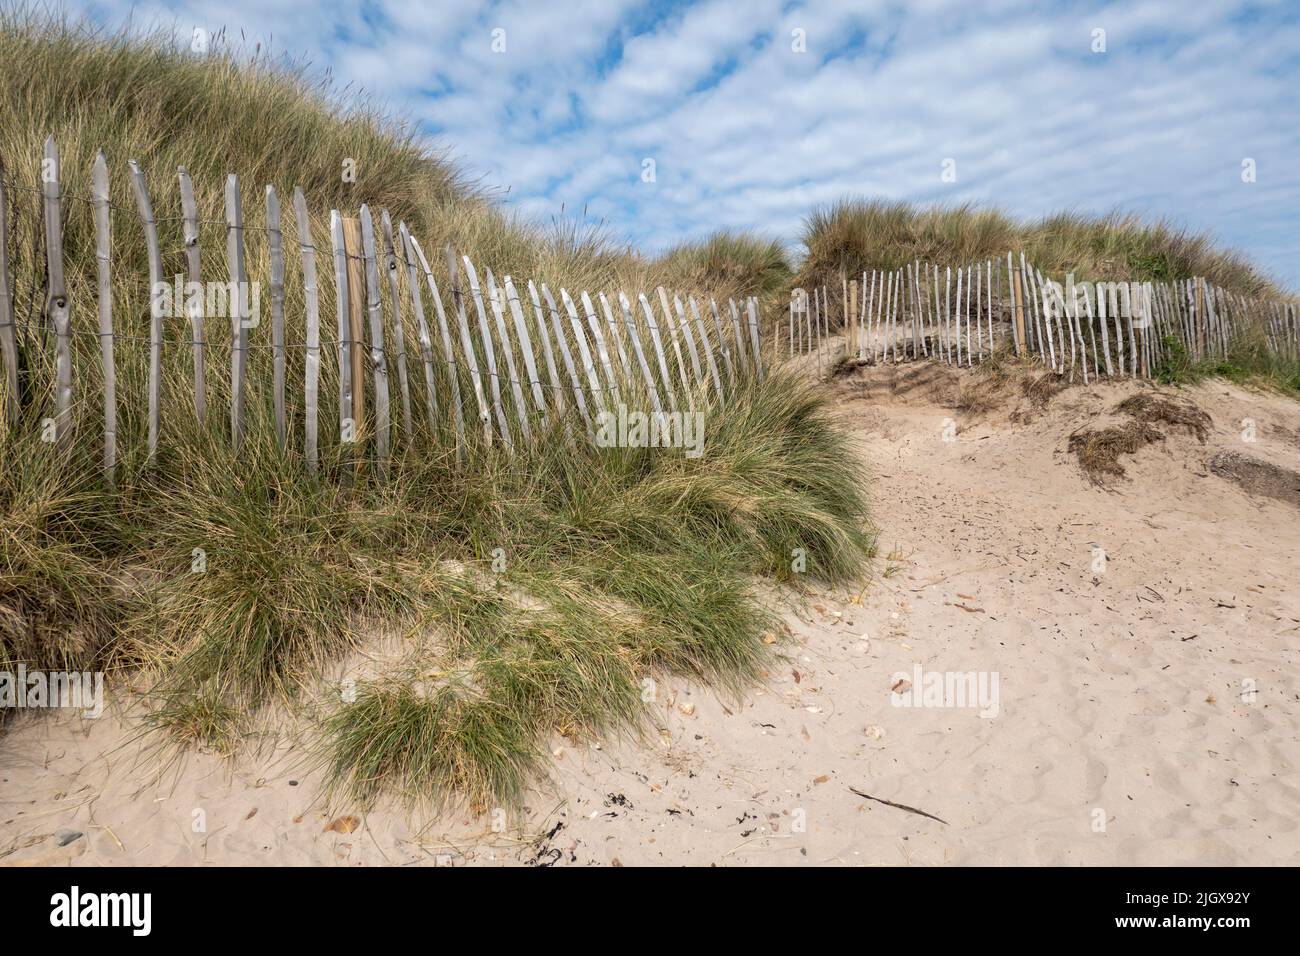 Sand dunes and fencing at Beadnell Bay Beach, Beadnell, Northumberland, England, United Kingdom, Europe Stock Photo